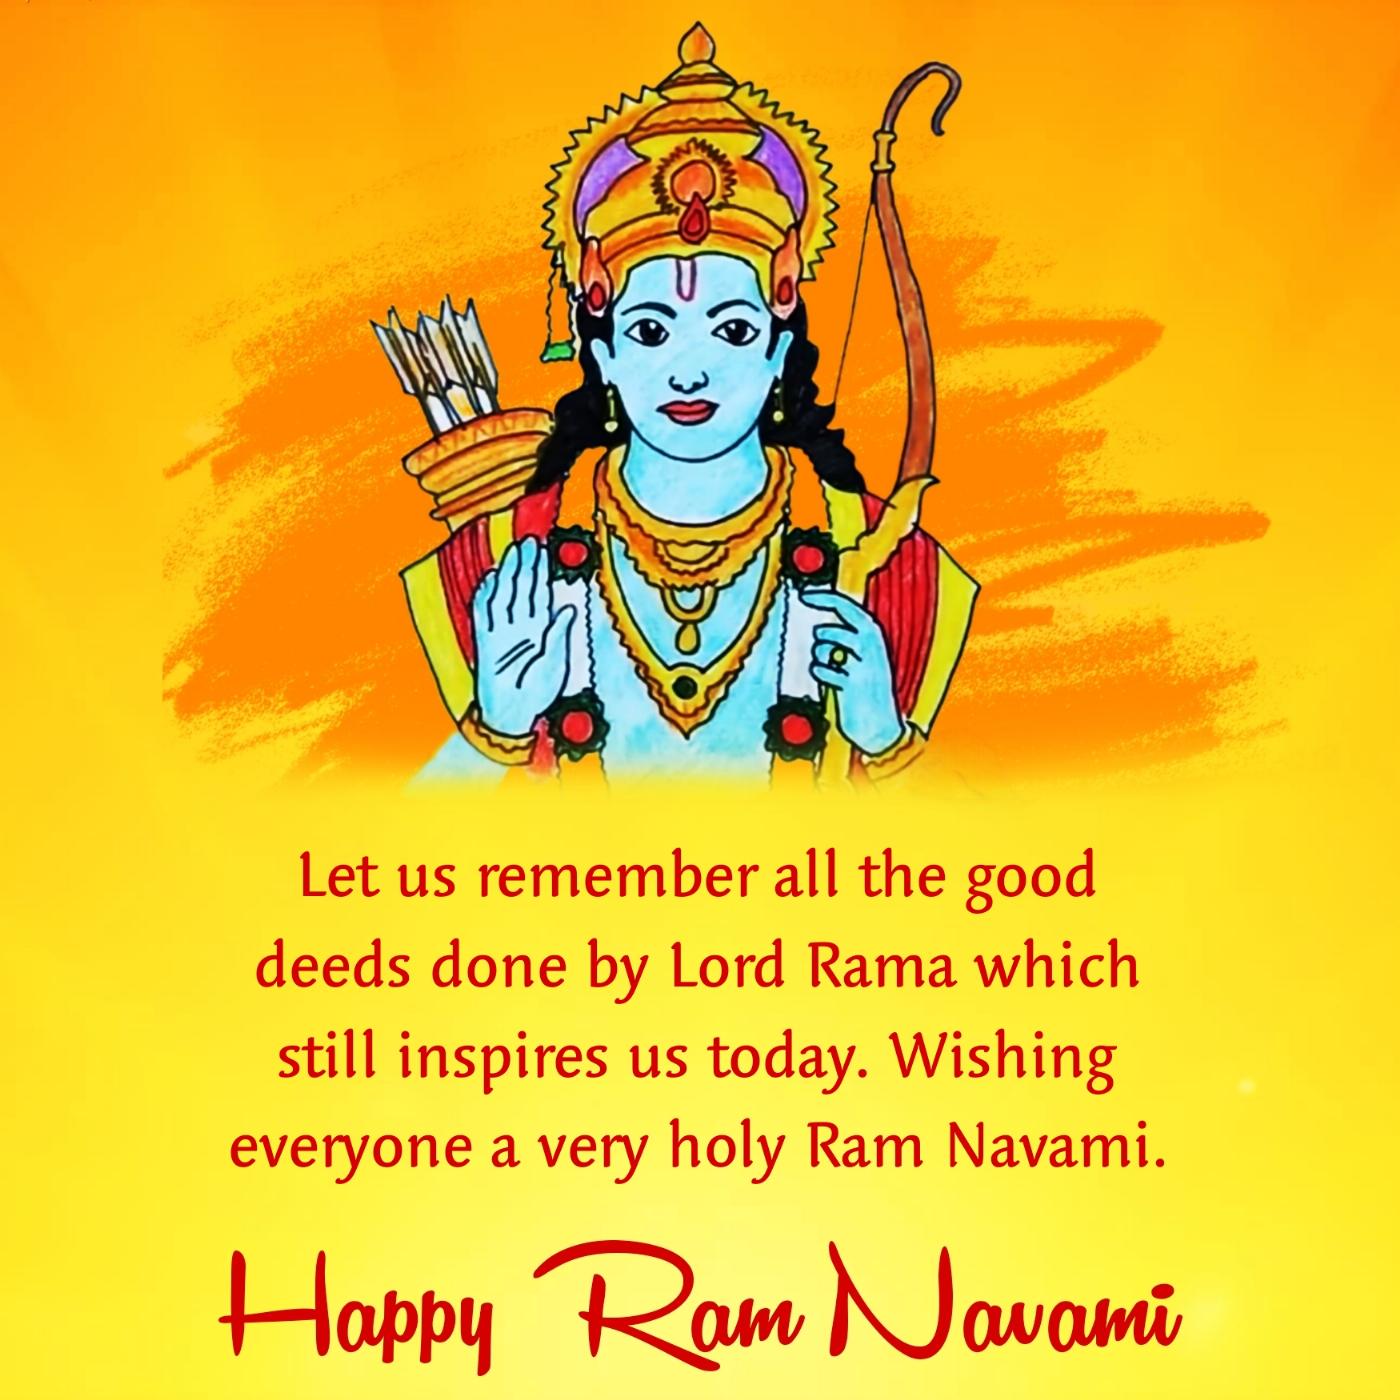 Let us remember all the good deeds done by Lord Rama